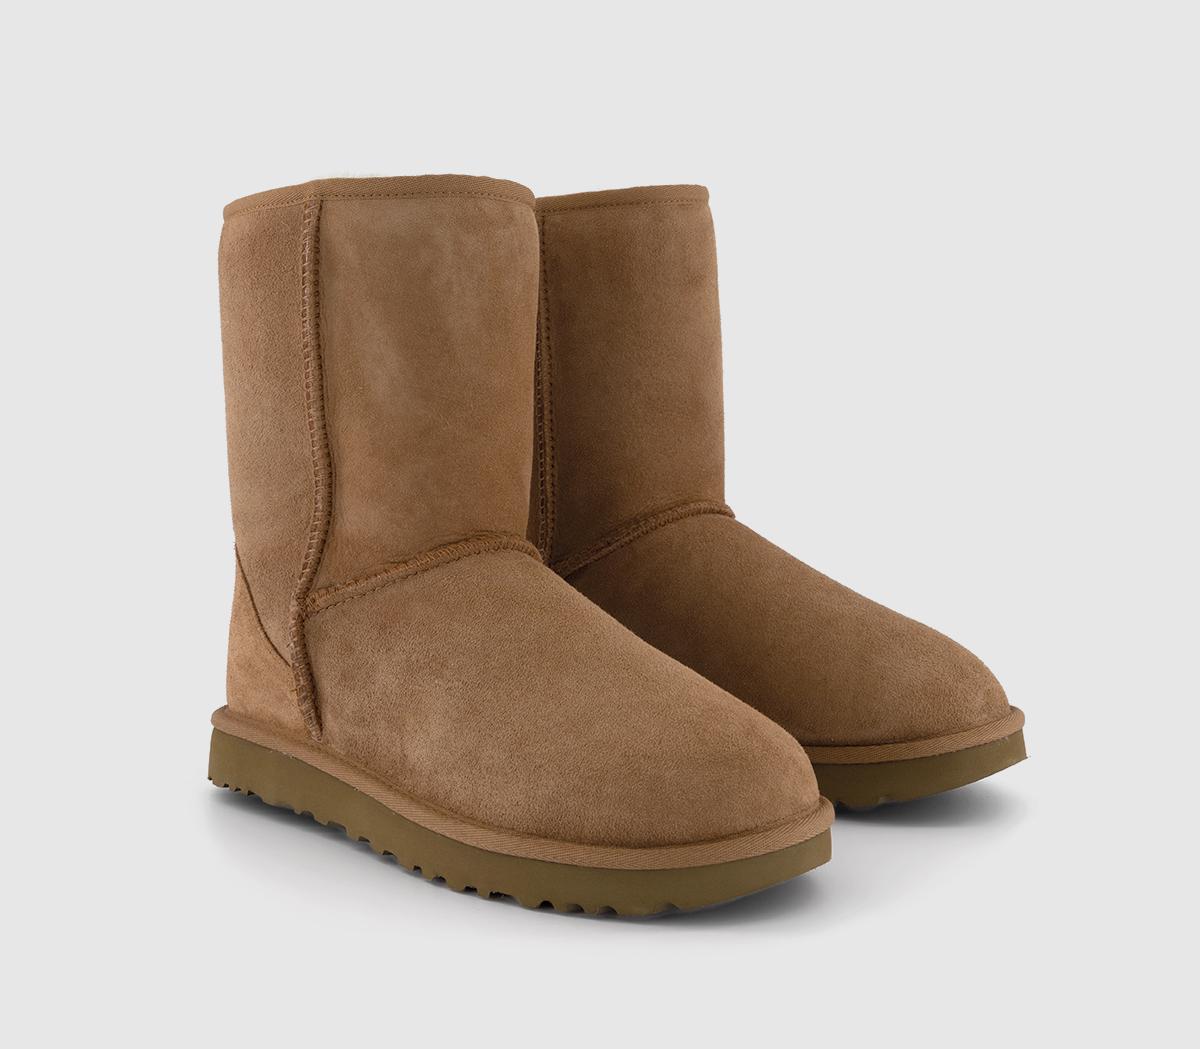 UGG Womens Classic Short Ii Boots Chestnut Suede In Tan, 8